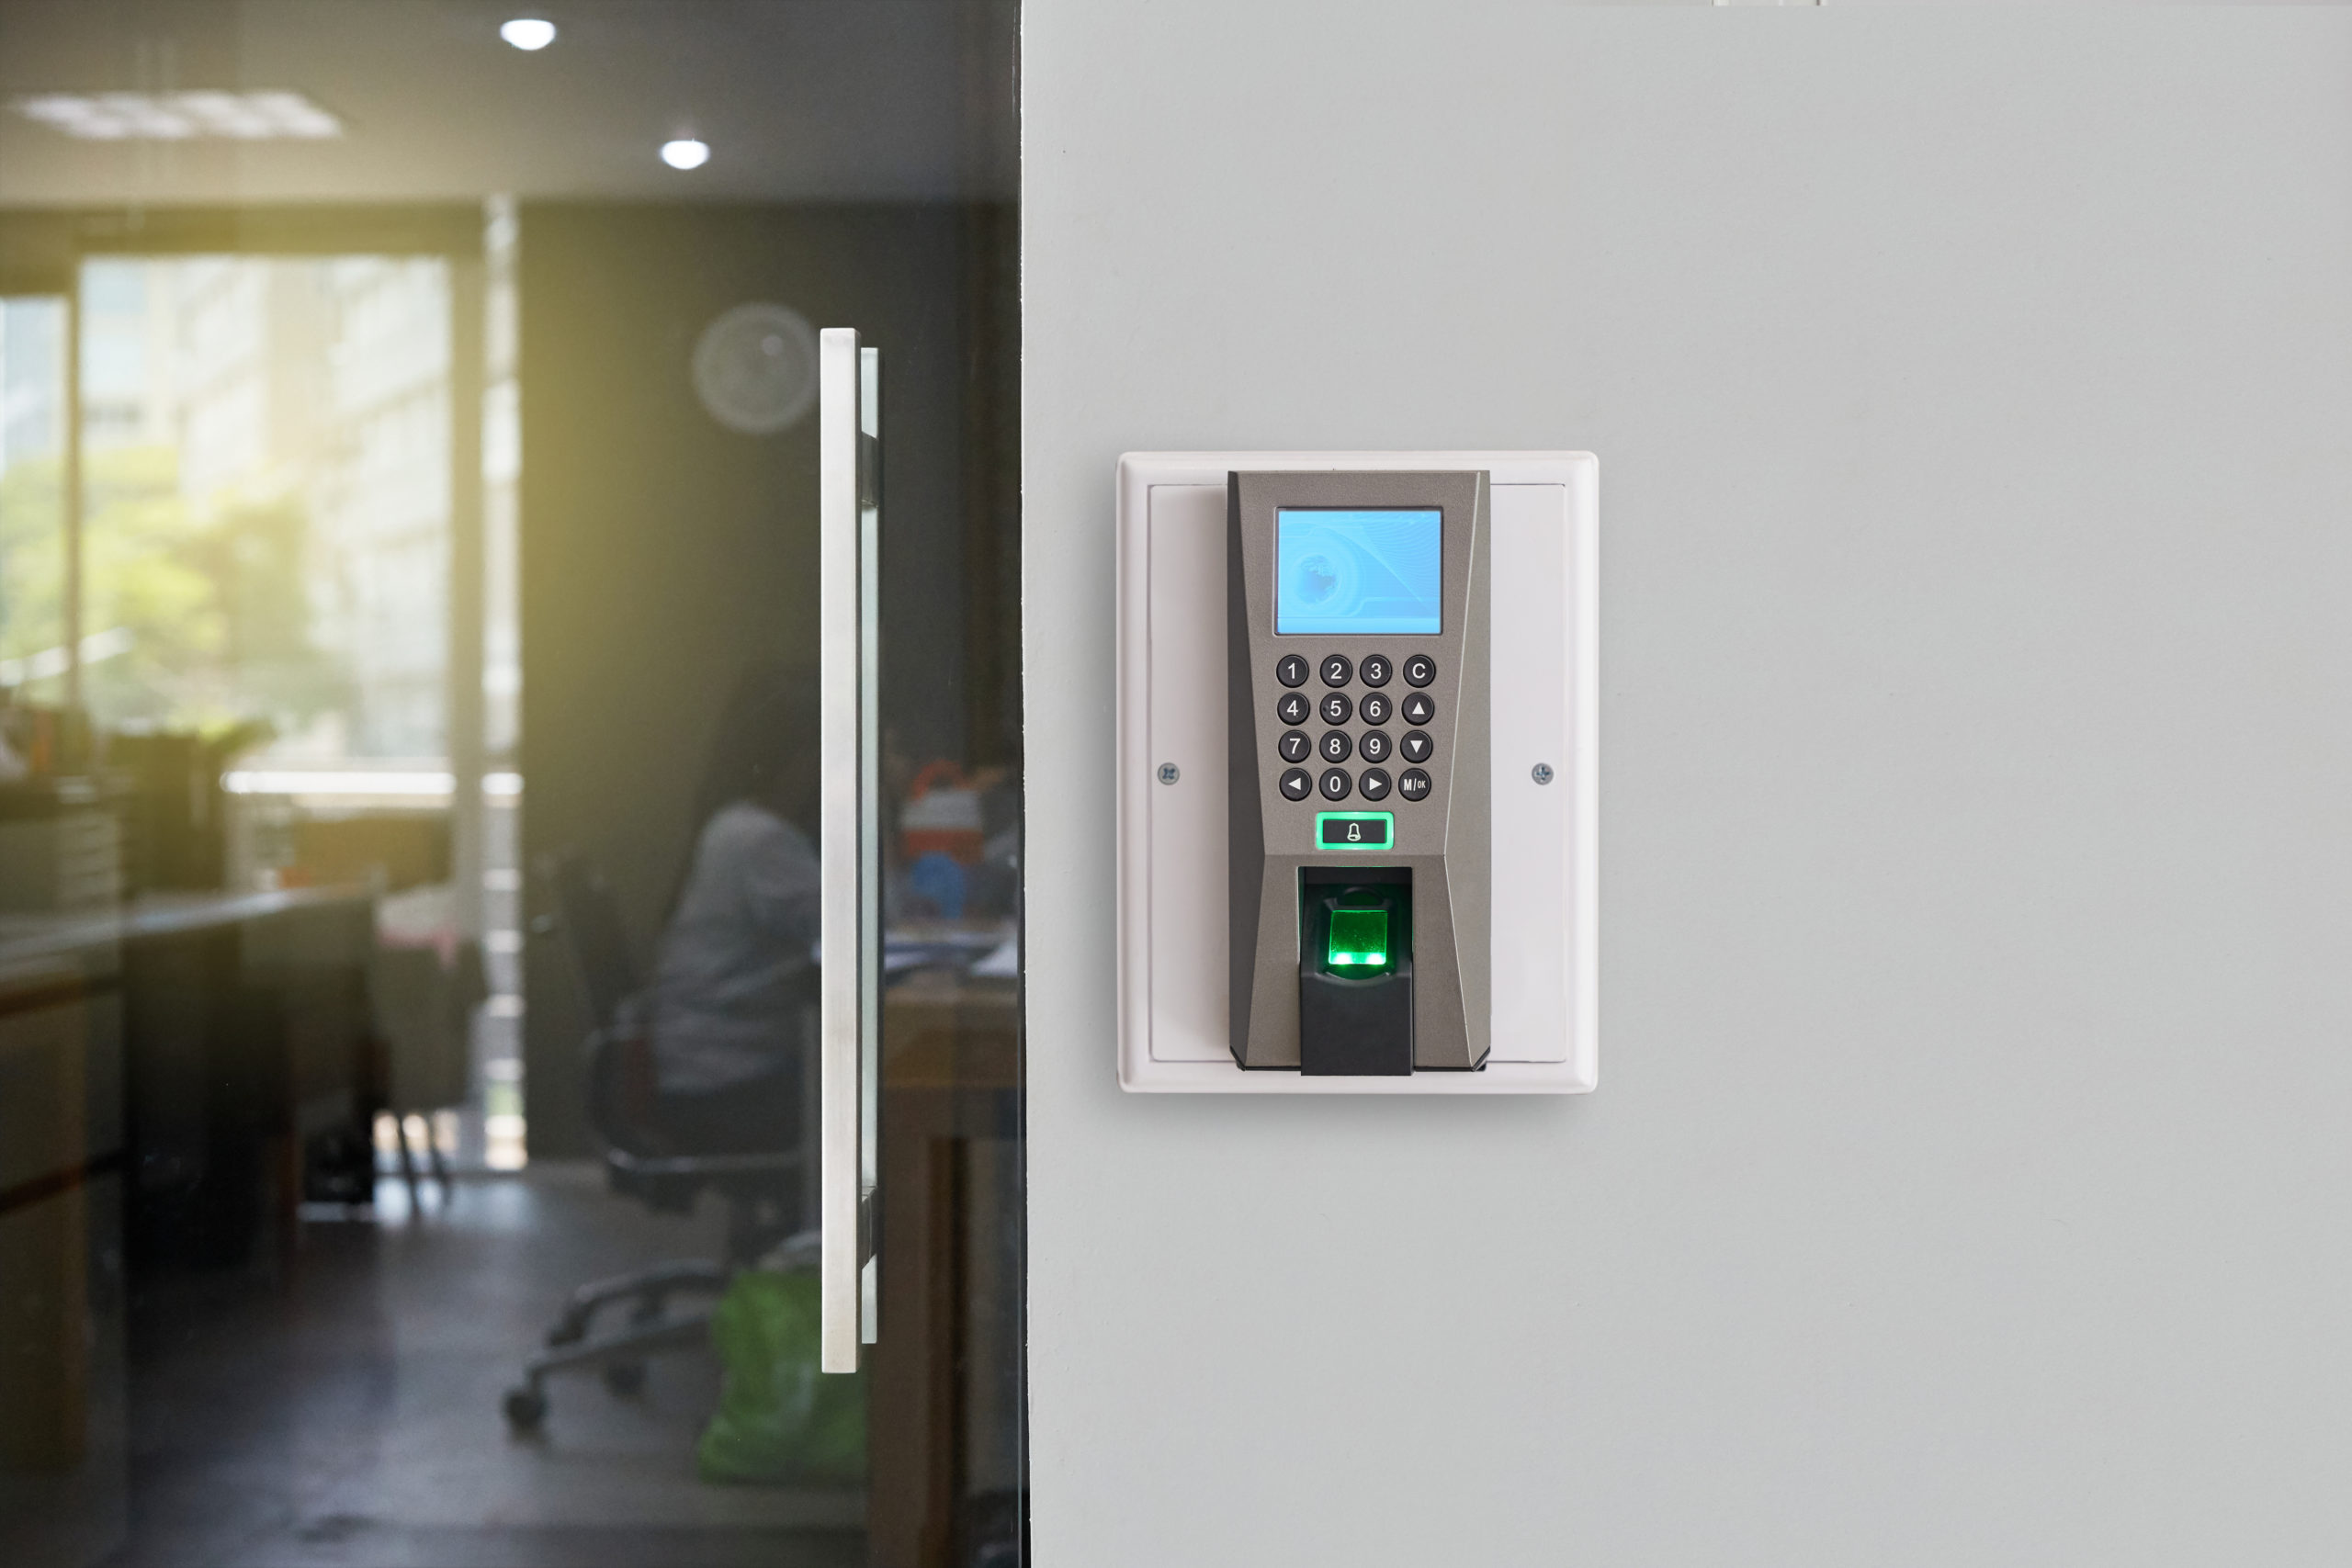 Electronic door access control system with finger print recognition and passcode entry